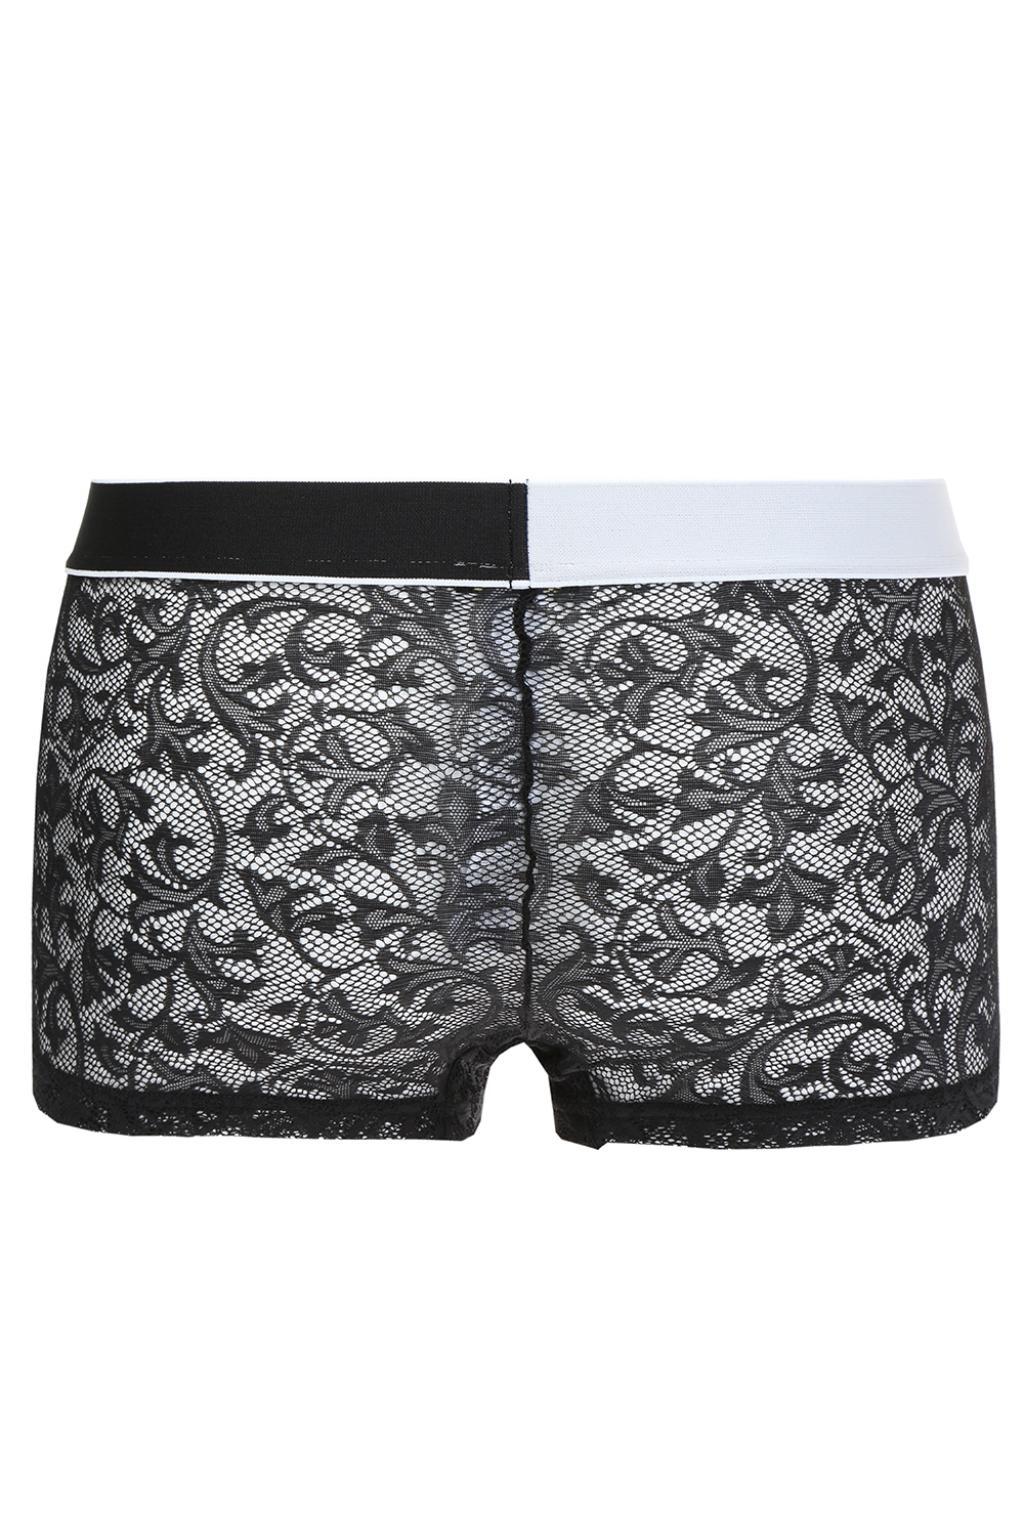 Versace Lace Boxers in Black for Men